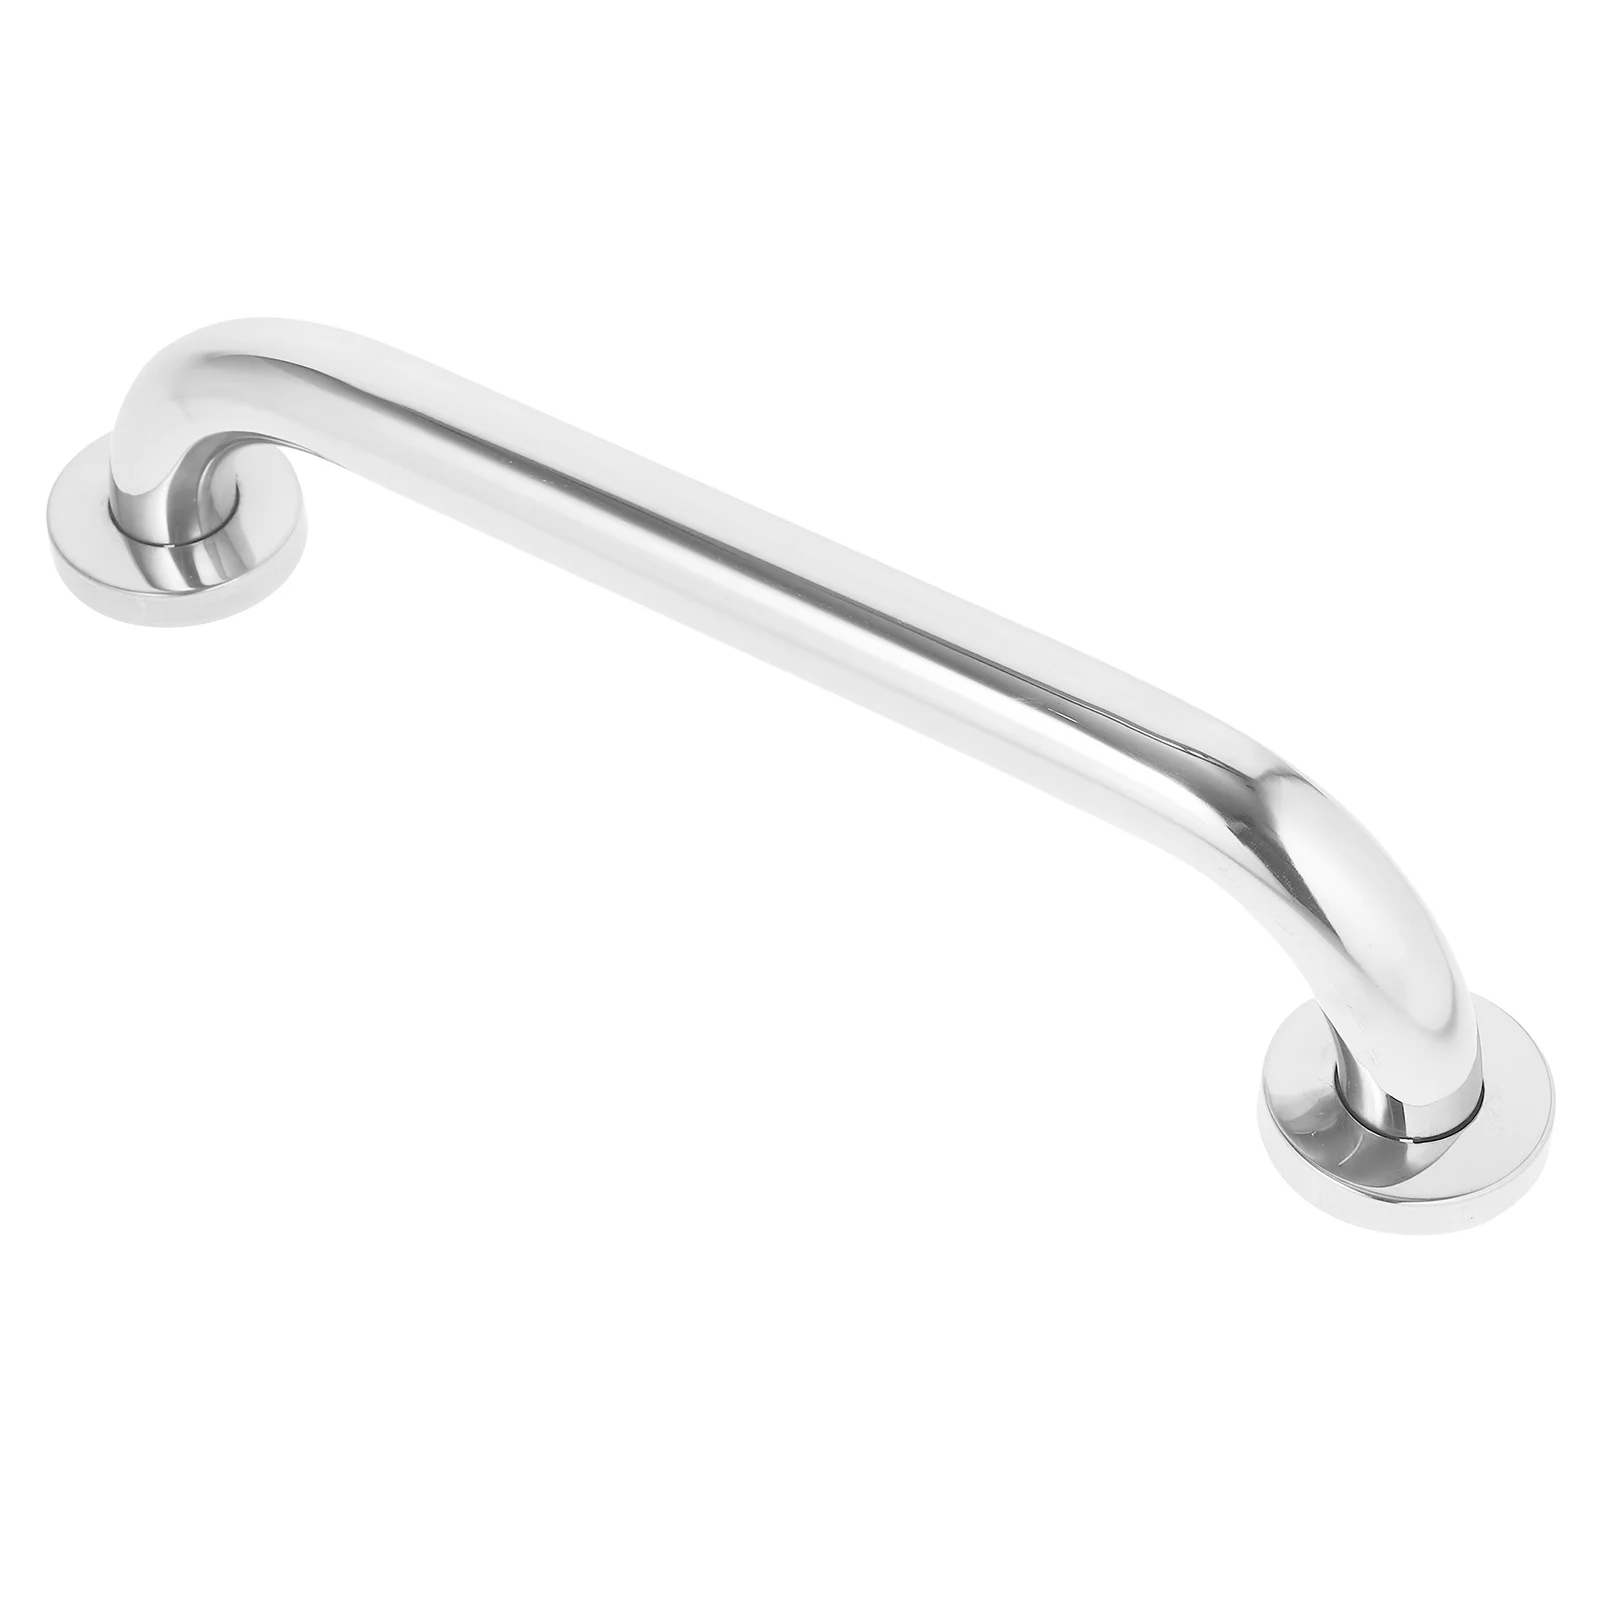 

1pc Old People Toilet Bathroom Bathtub Handrail Safety Grab Bar Stainless Steel Handle Armrest Safety Hand Rail Support Assist